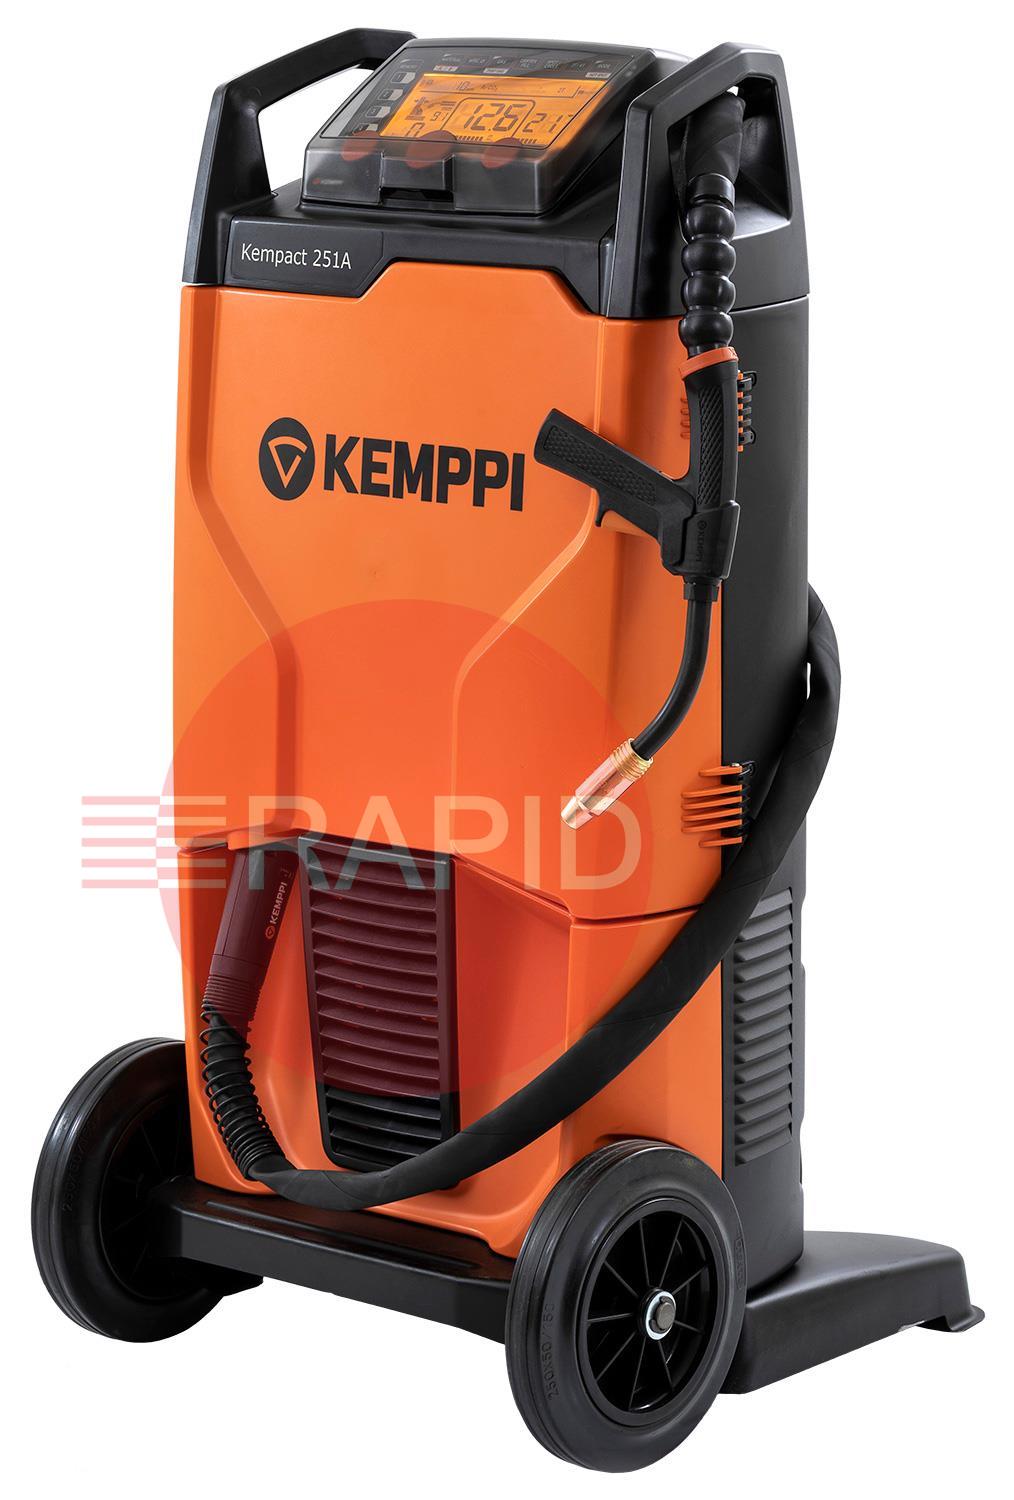 P2305GXE  Kemppi Kempact RA 251A, 250A 1 Phase 230v Mig Welder, with Flexlite GXe 305G 3.5m Torch